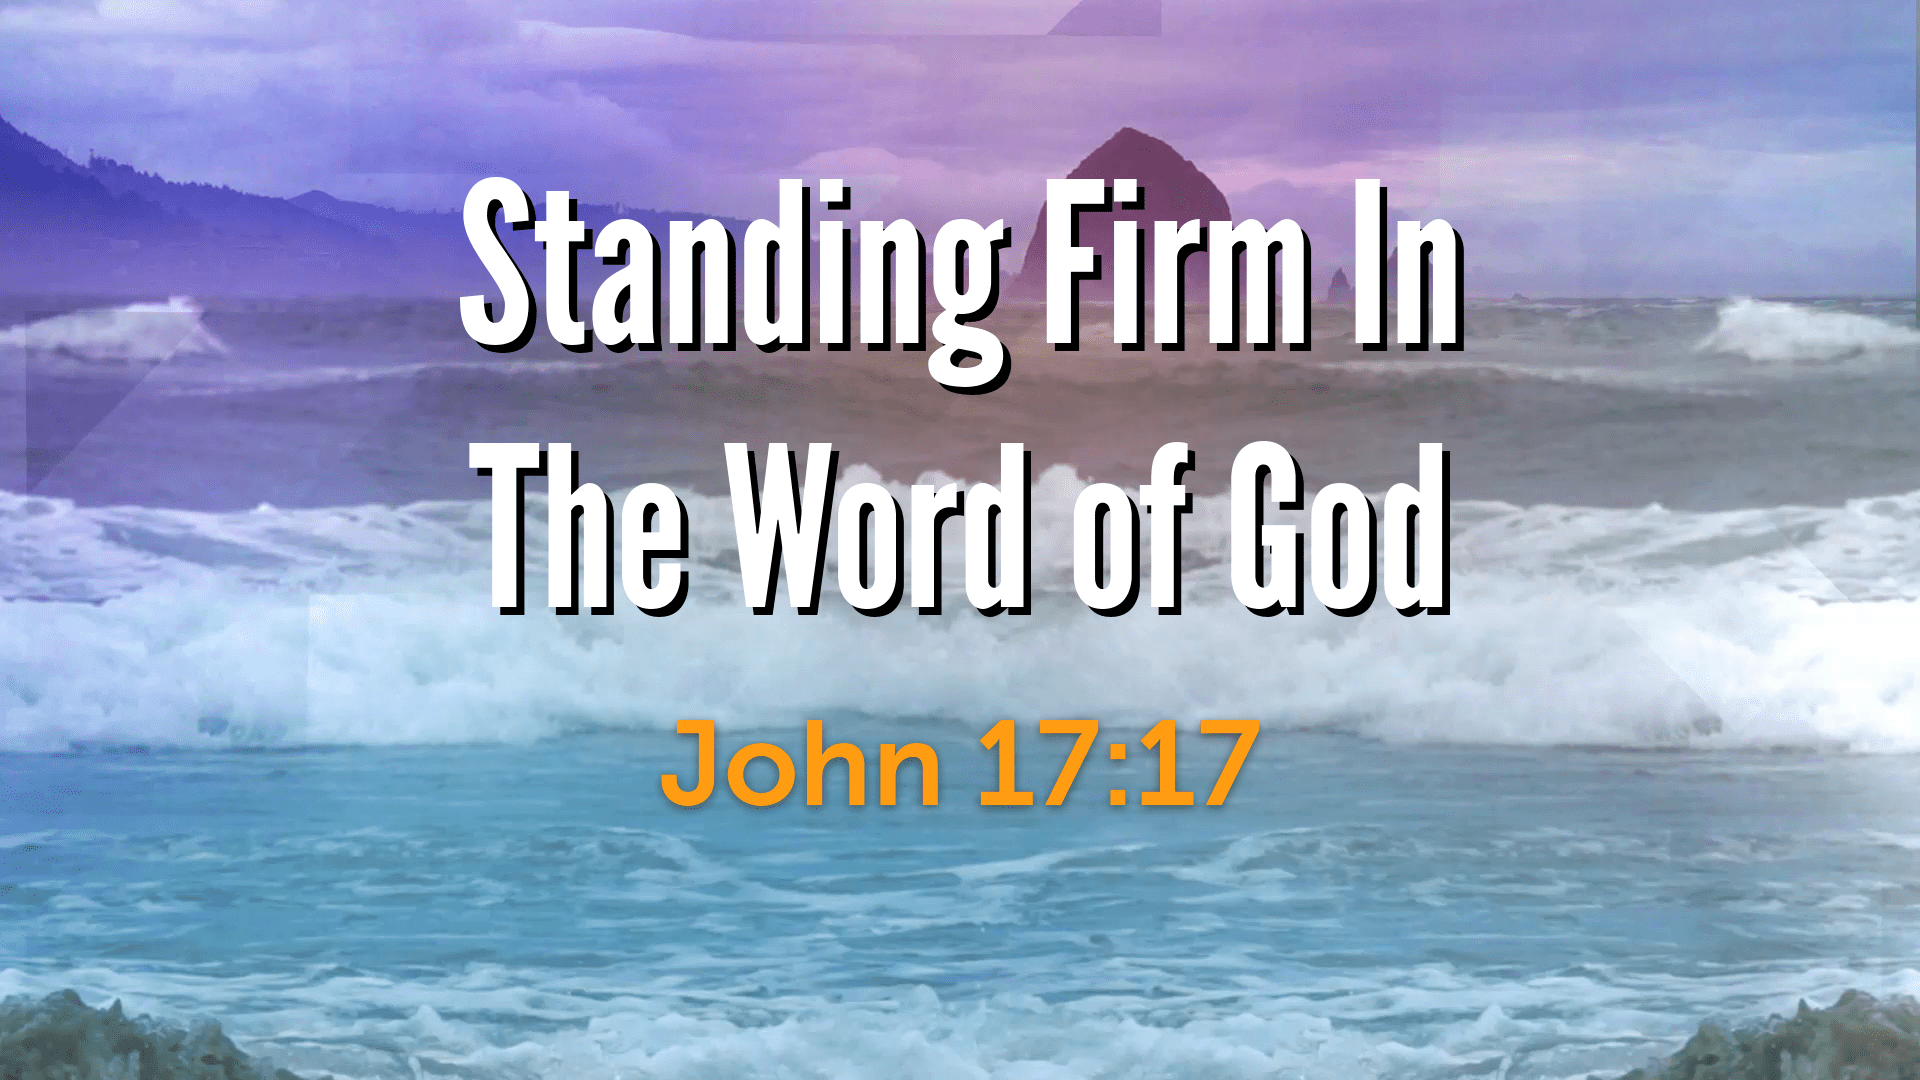 Standing Firm In The Word of God